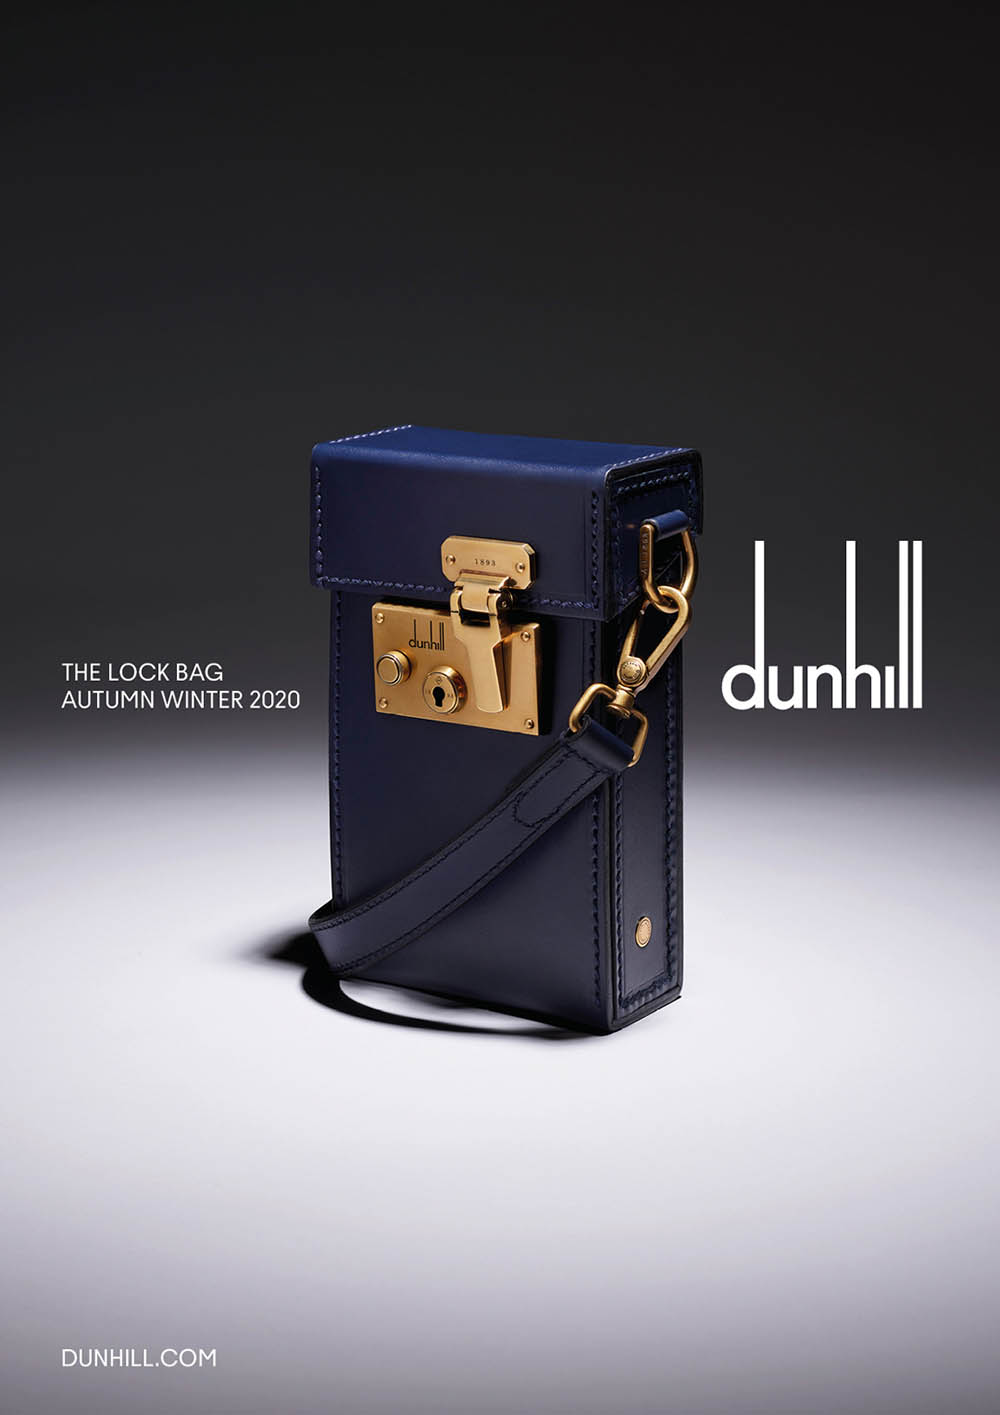 Dunhill Fall Winter 2020 Campaign